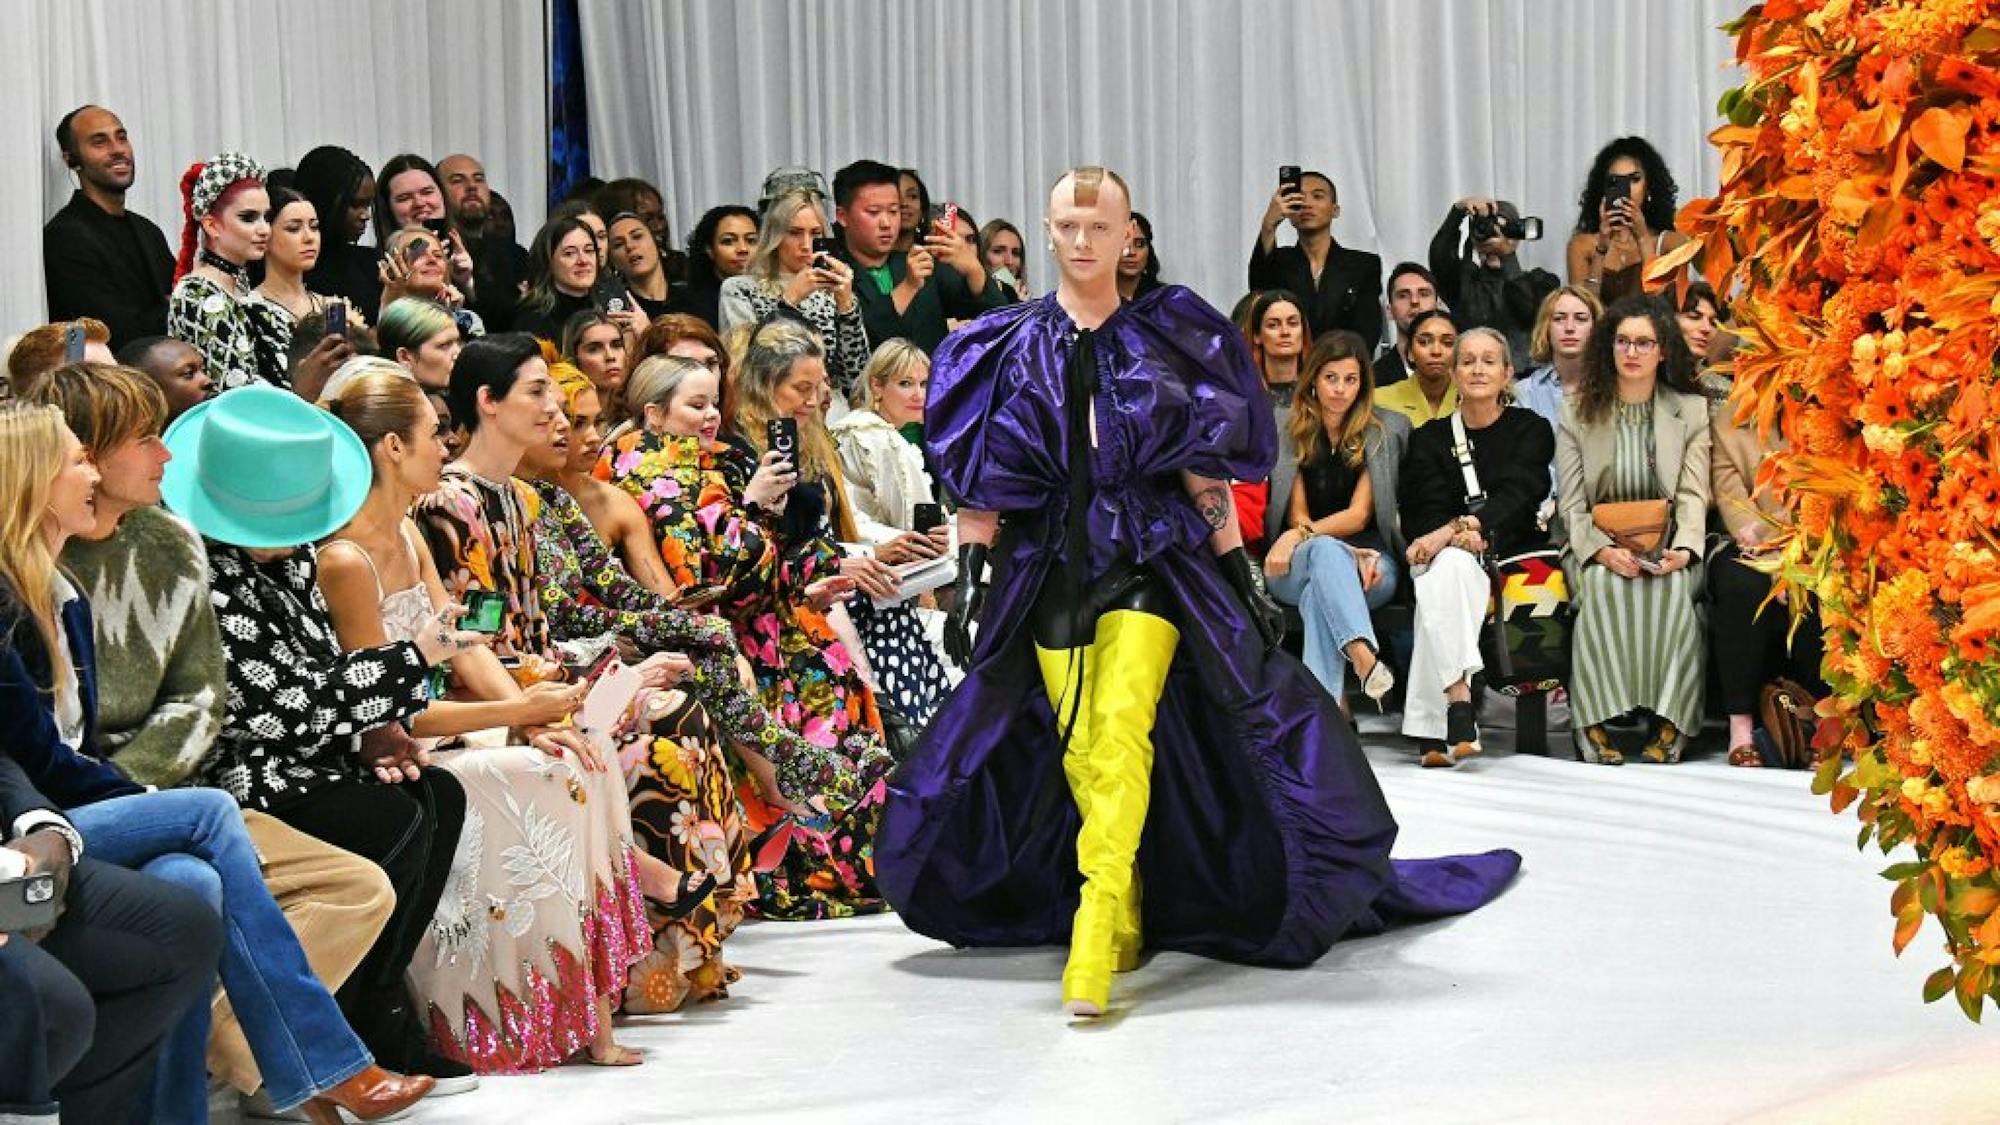 Cool Britannia: Fashion Week comes to London - and it's as edgy as ever